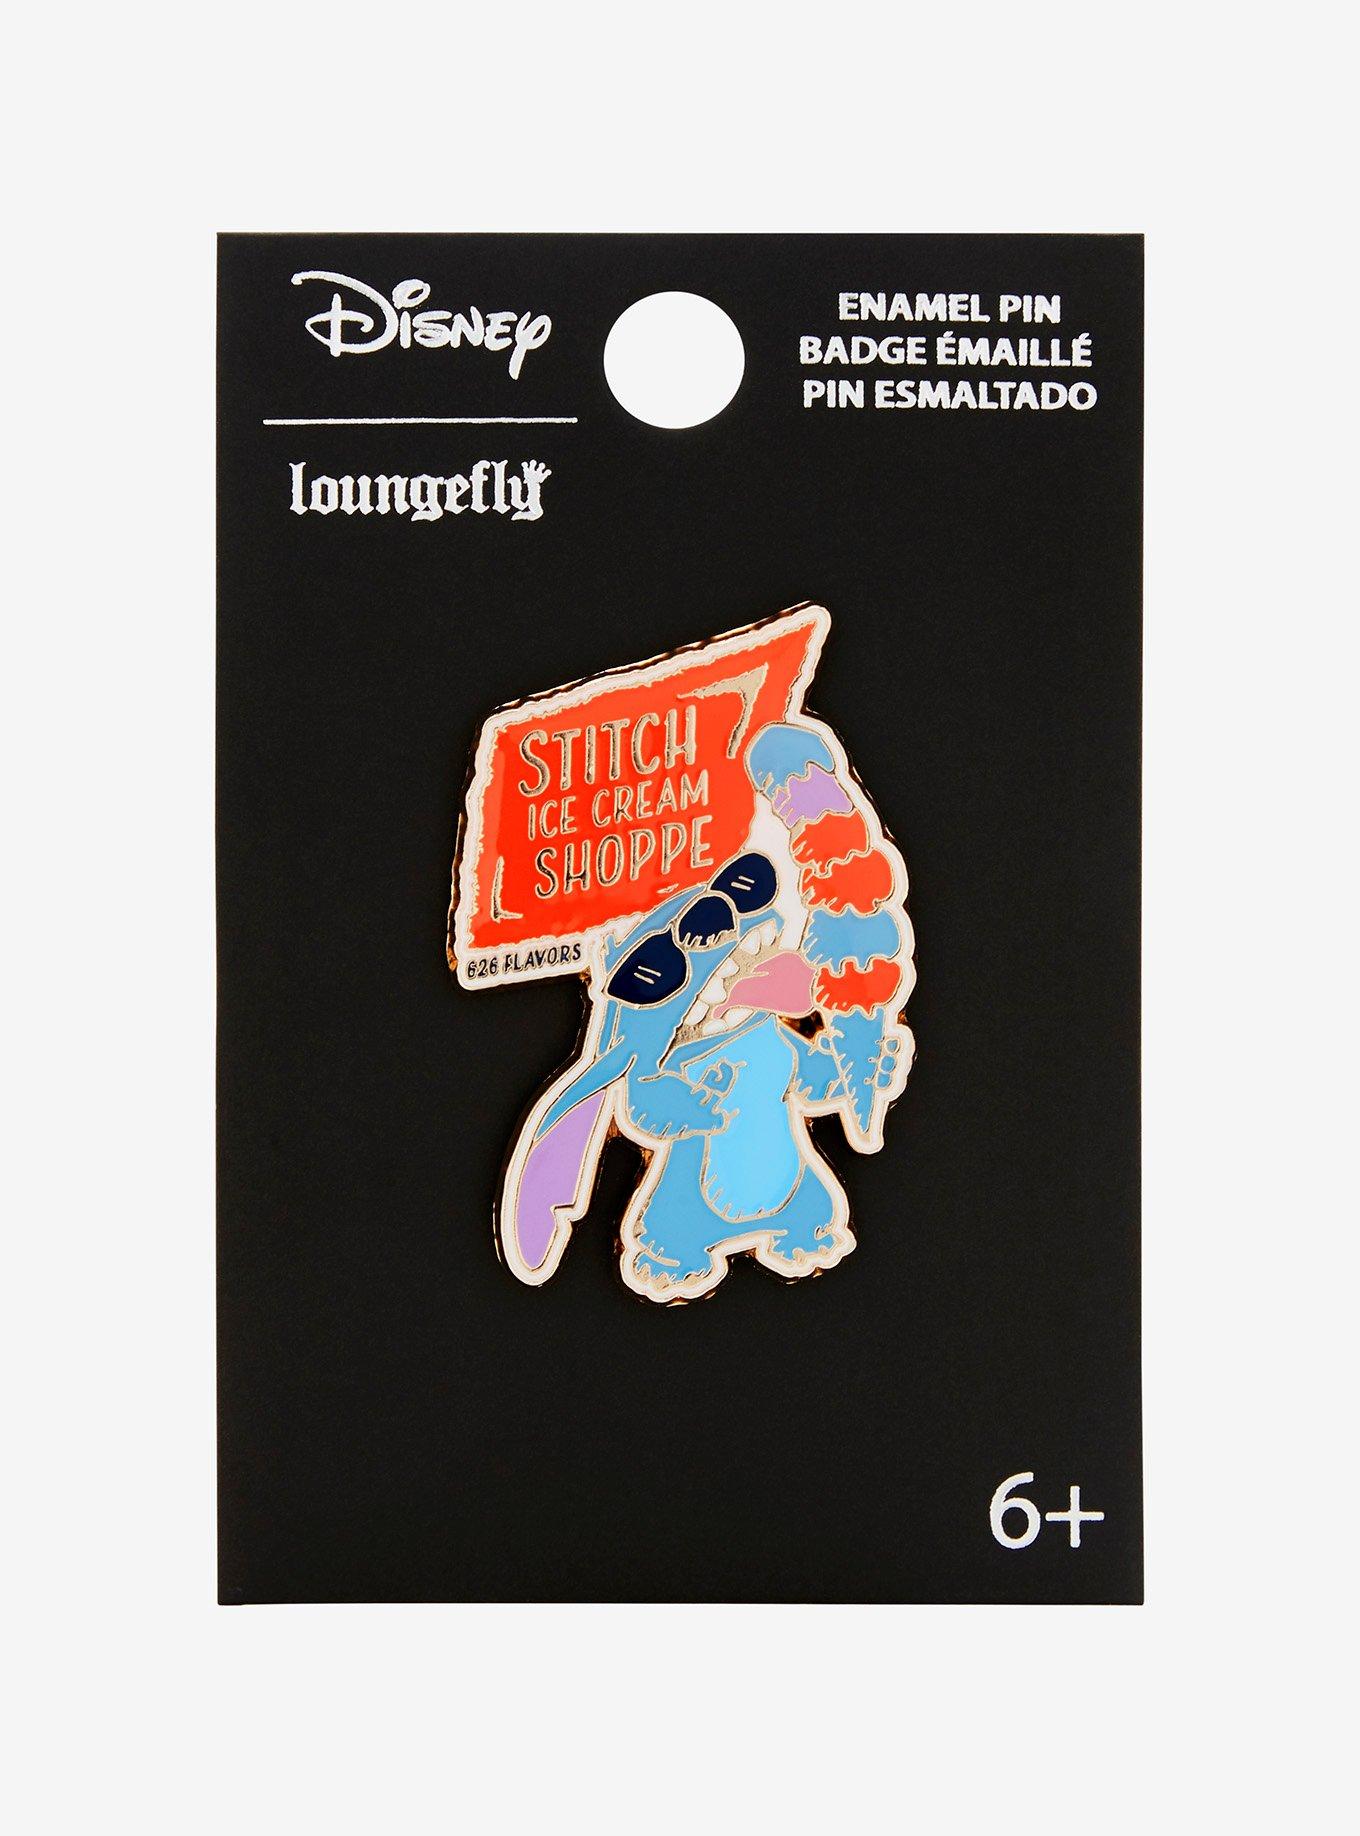 Loungefly Disney Lilo & Stitch Ice Cream Shoppe 626 Flavors Enamel Pin — BoxLunch Exclusive, , hi-res